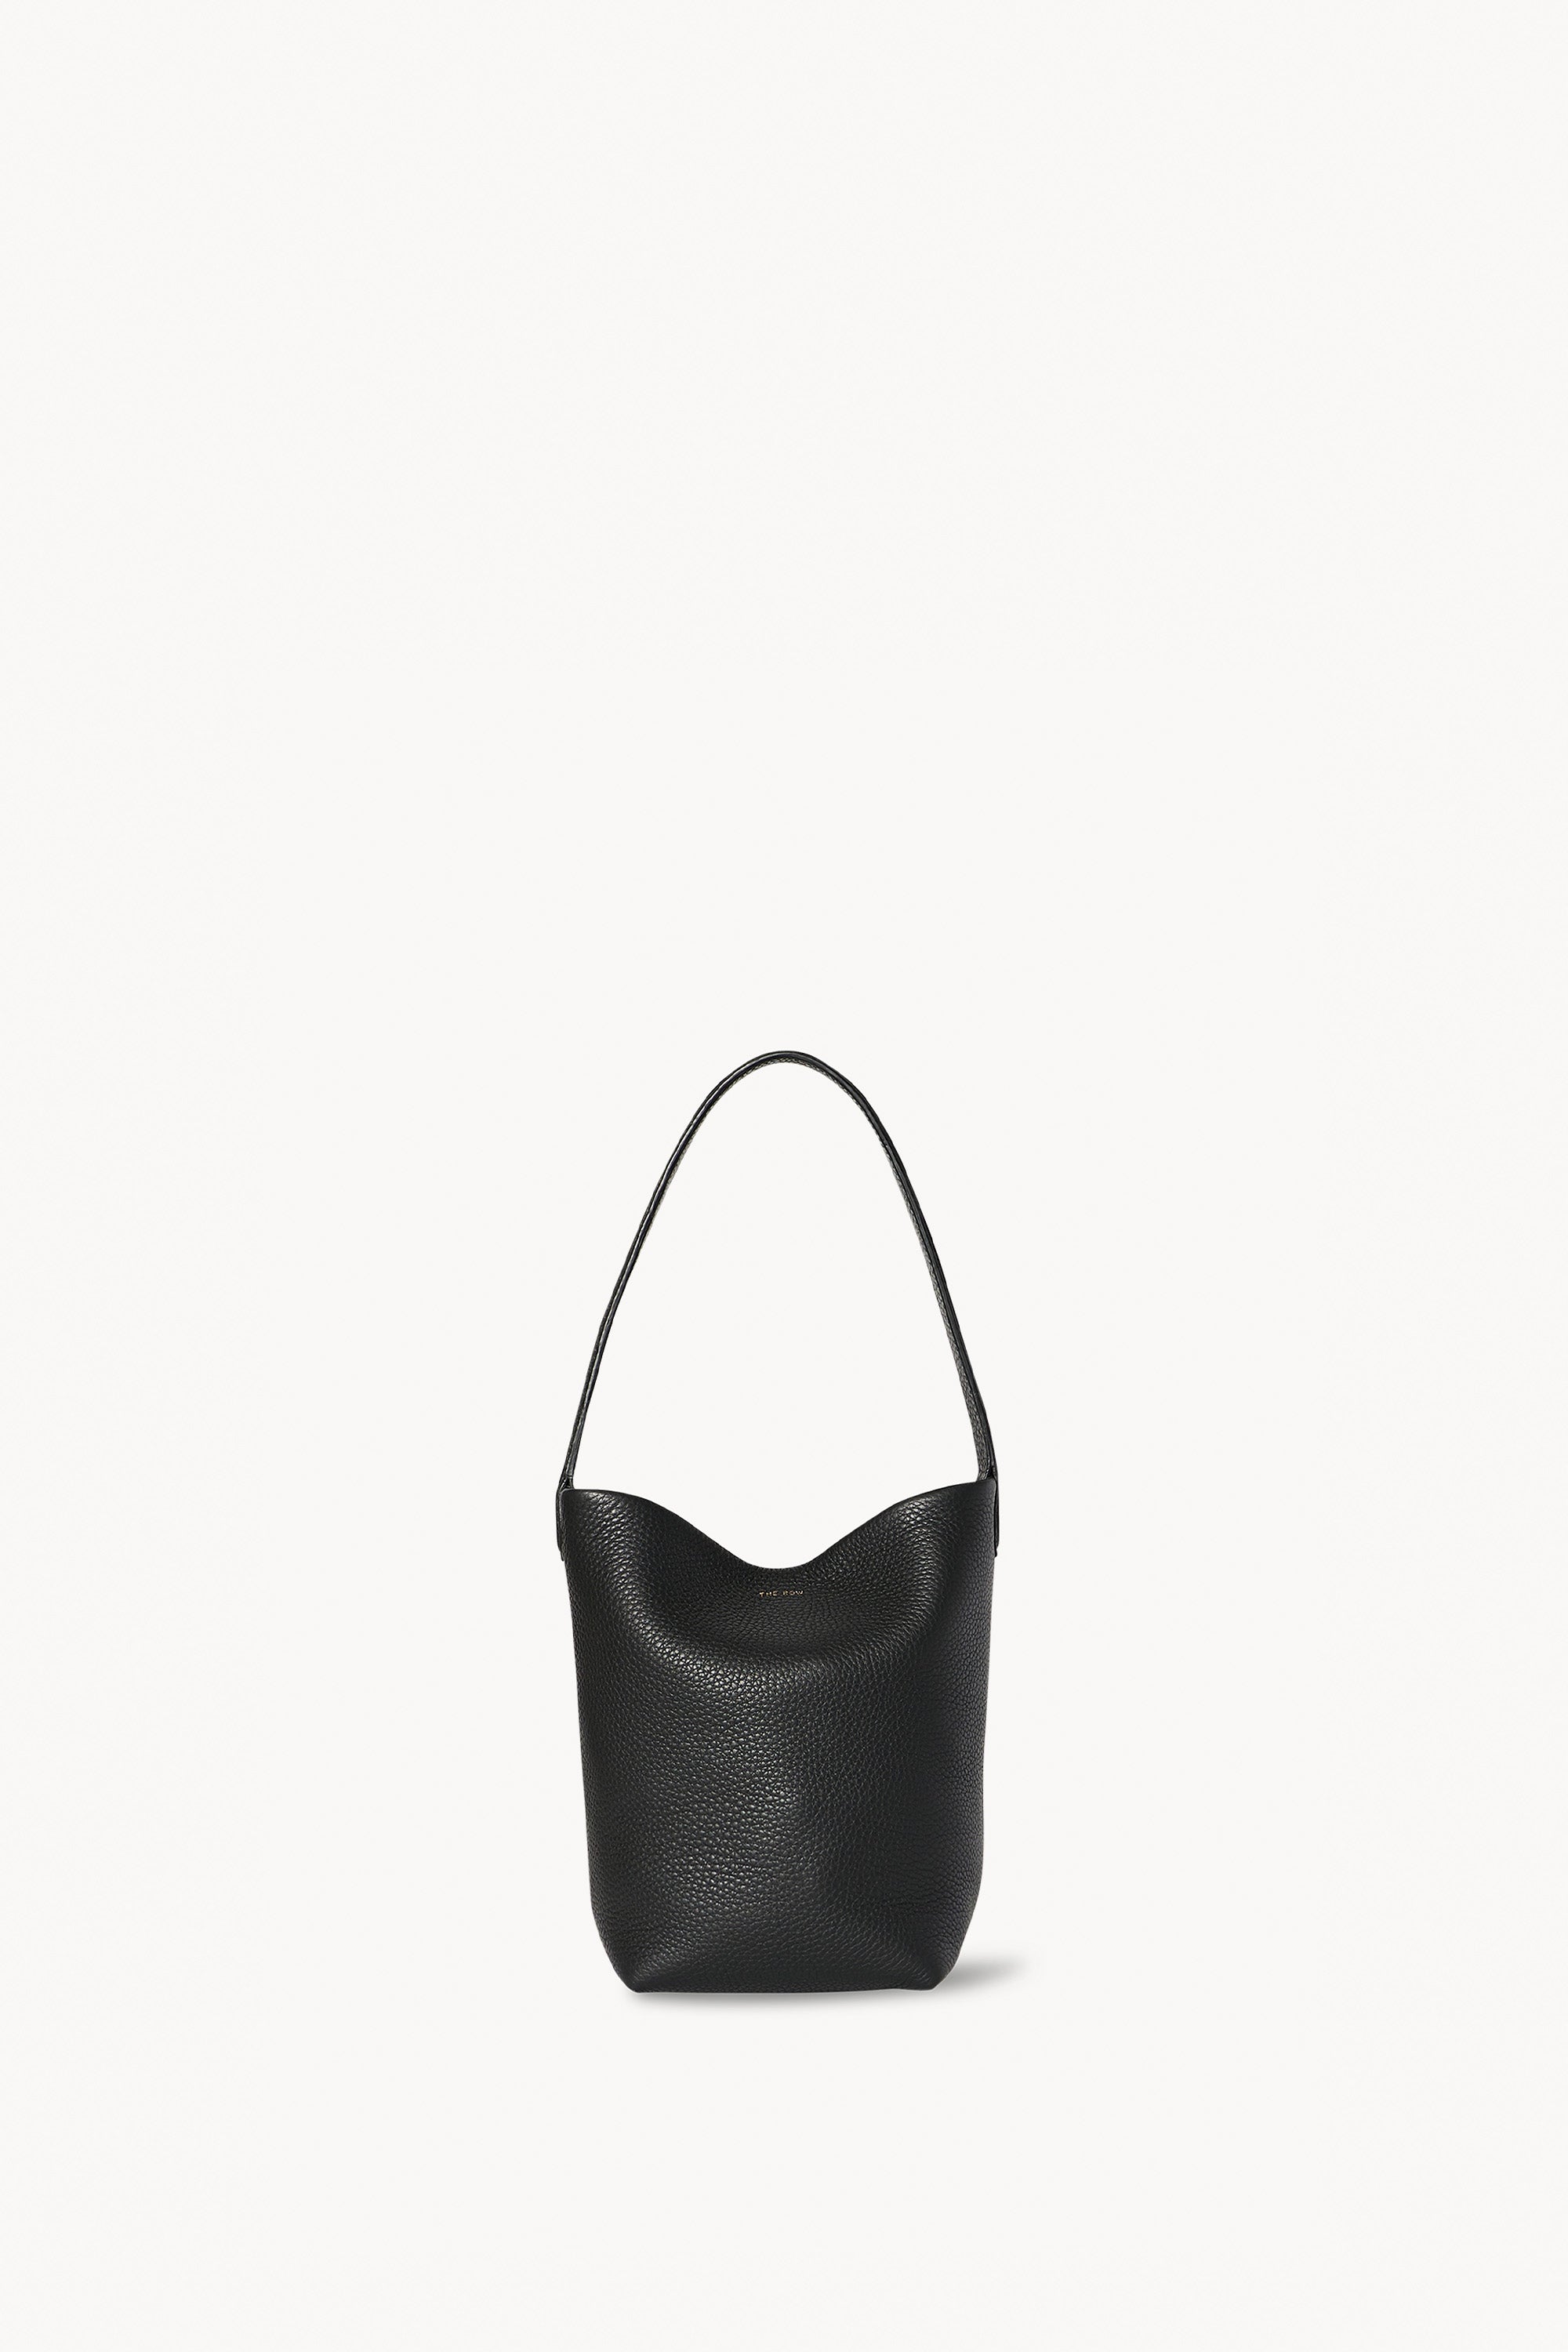 THE ROW ザロウ Small N/S Park Tote ブラック 新品 iveyartistry.com